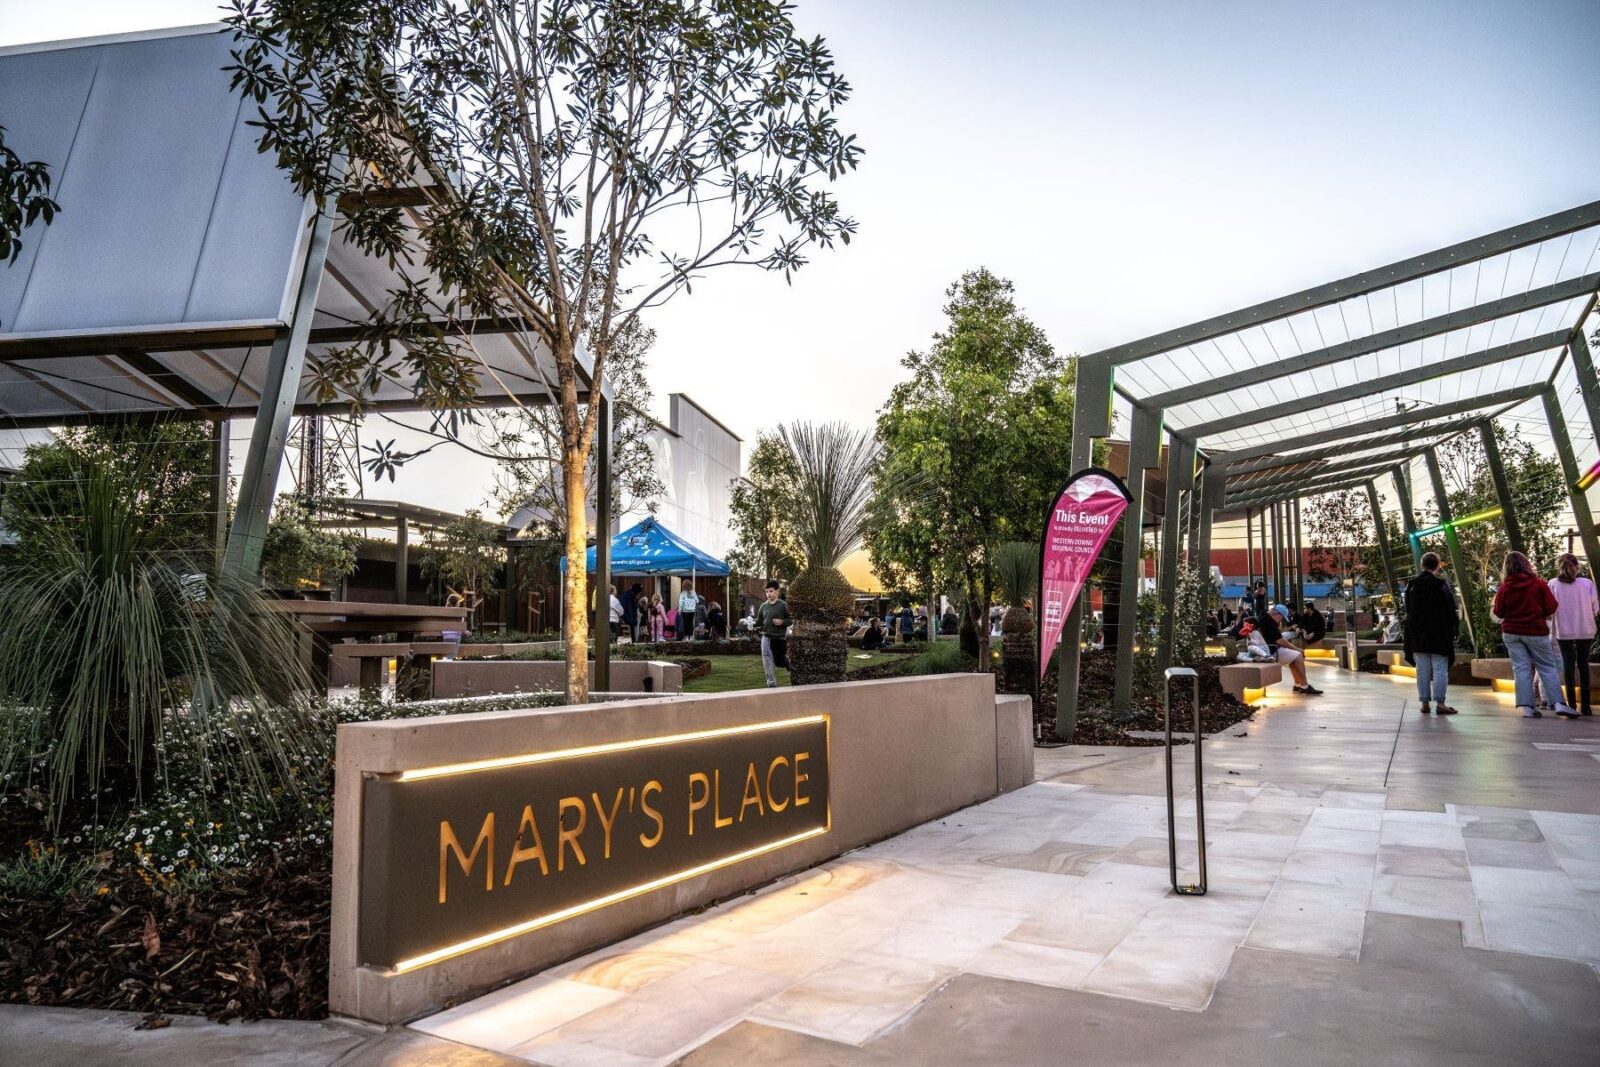 A beautiful public space dedicated to Mary Barry, local icon and owner of the Commercial Hotel.